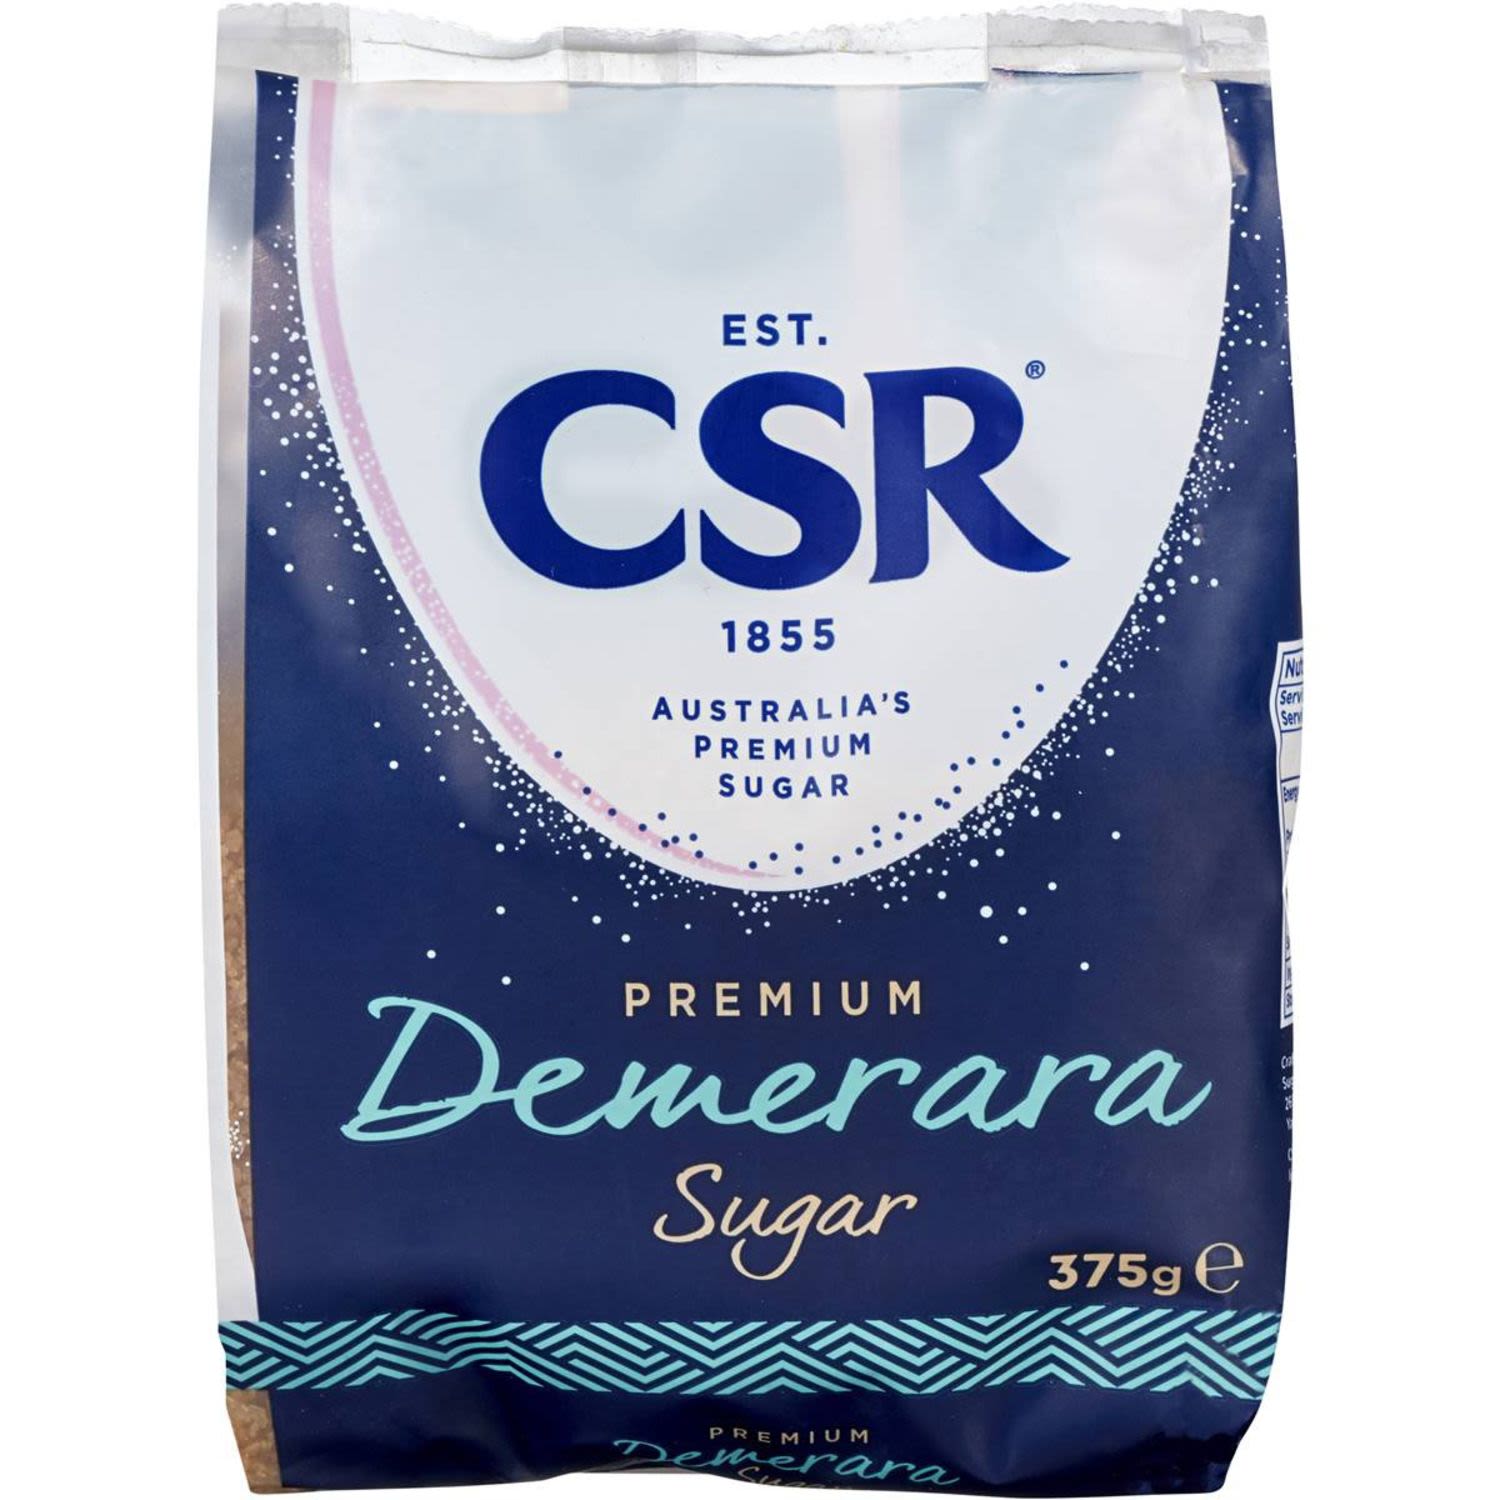 Since 1855, generations of Australians have enjoyed the premium quality range of CSR sugars and syrups.

Full bodied with a rich golden colour and subtle butterscotch aroma, CSR Demerara Sugar is perfect for baking and sweetening your coffee or for some extra crunch on your cereal or desserts.<br /> <br />